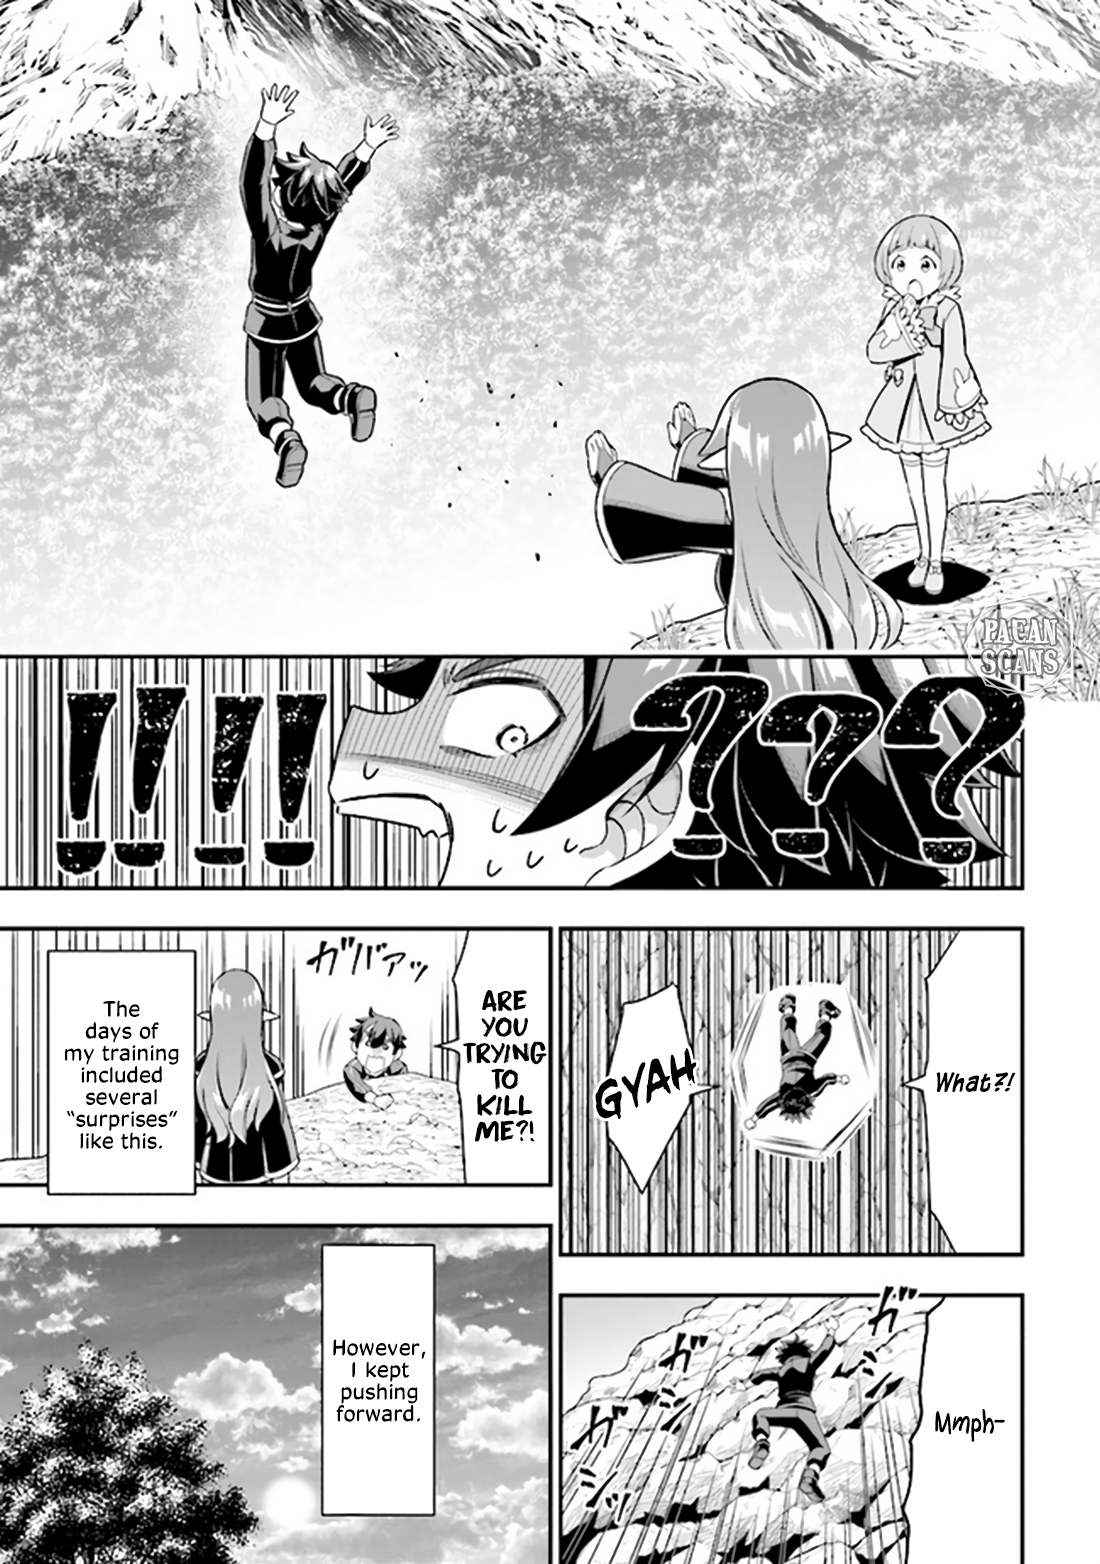 Did You Think You Could Run After Reincarnating, Nii-San? - Page 2